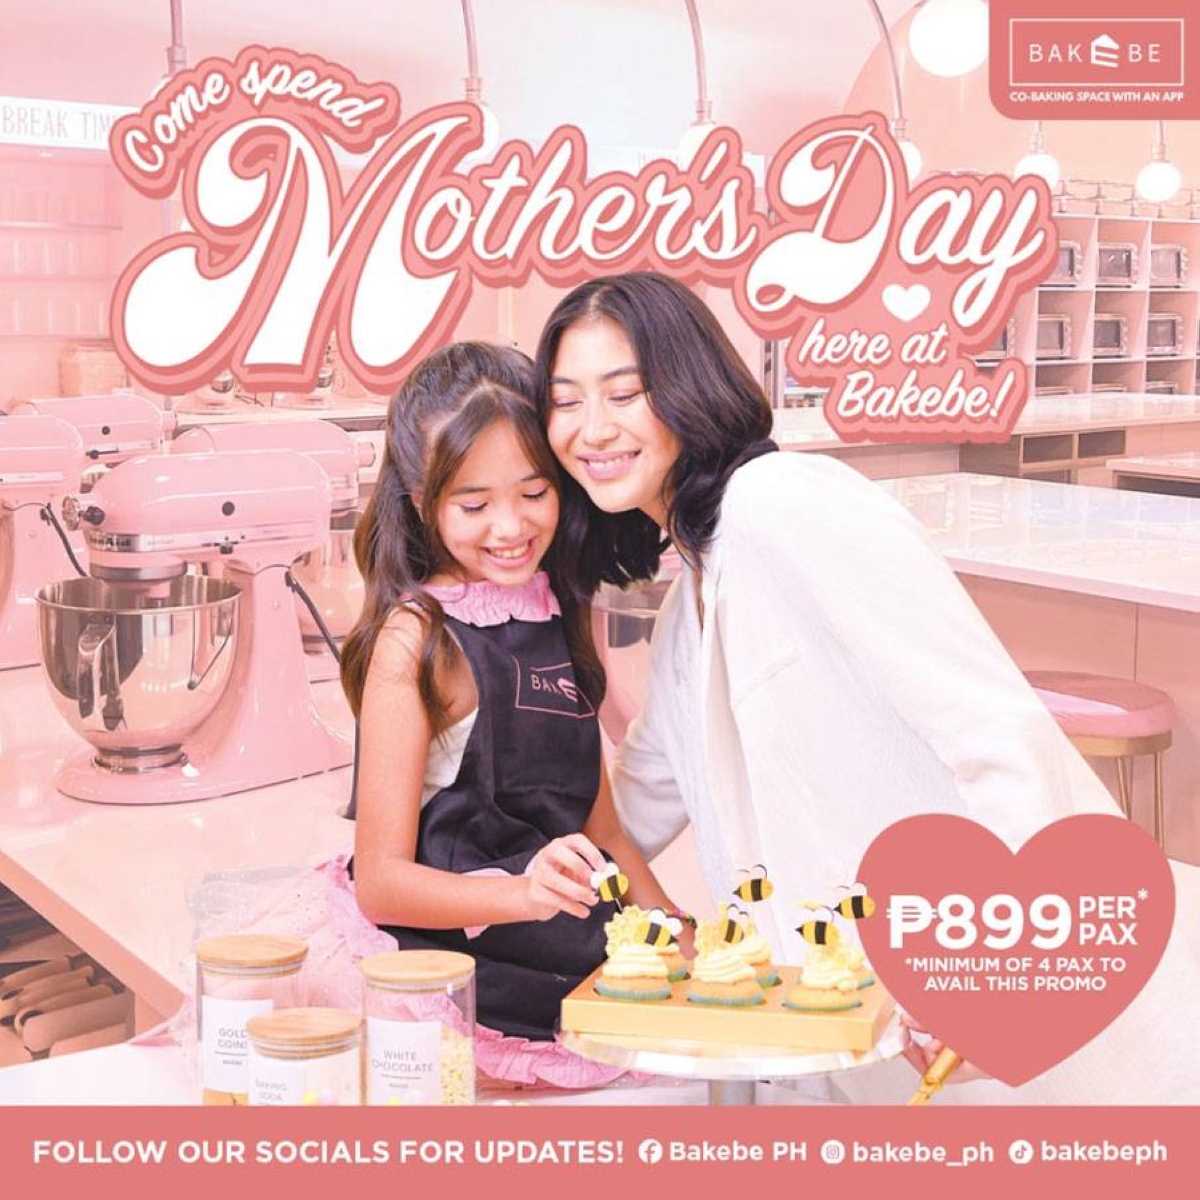 sweeten mom's day at bakebe with this irresistible mother's day offer